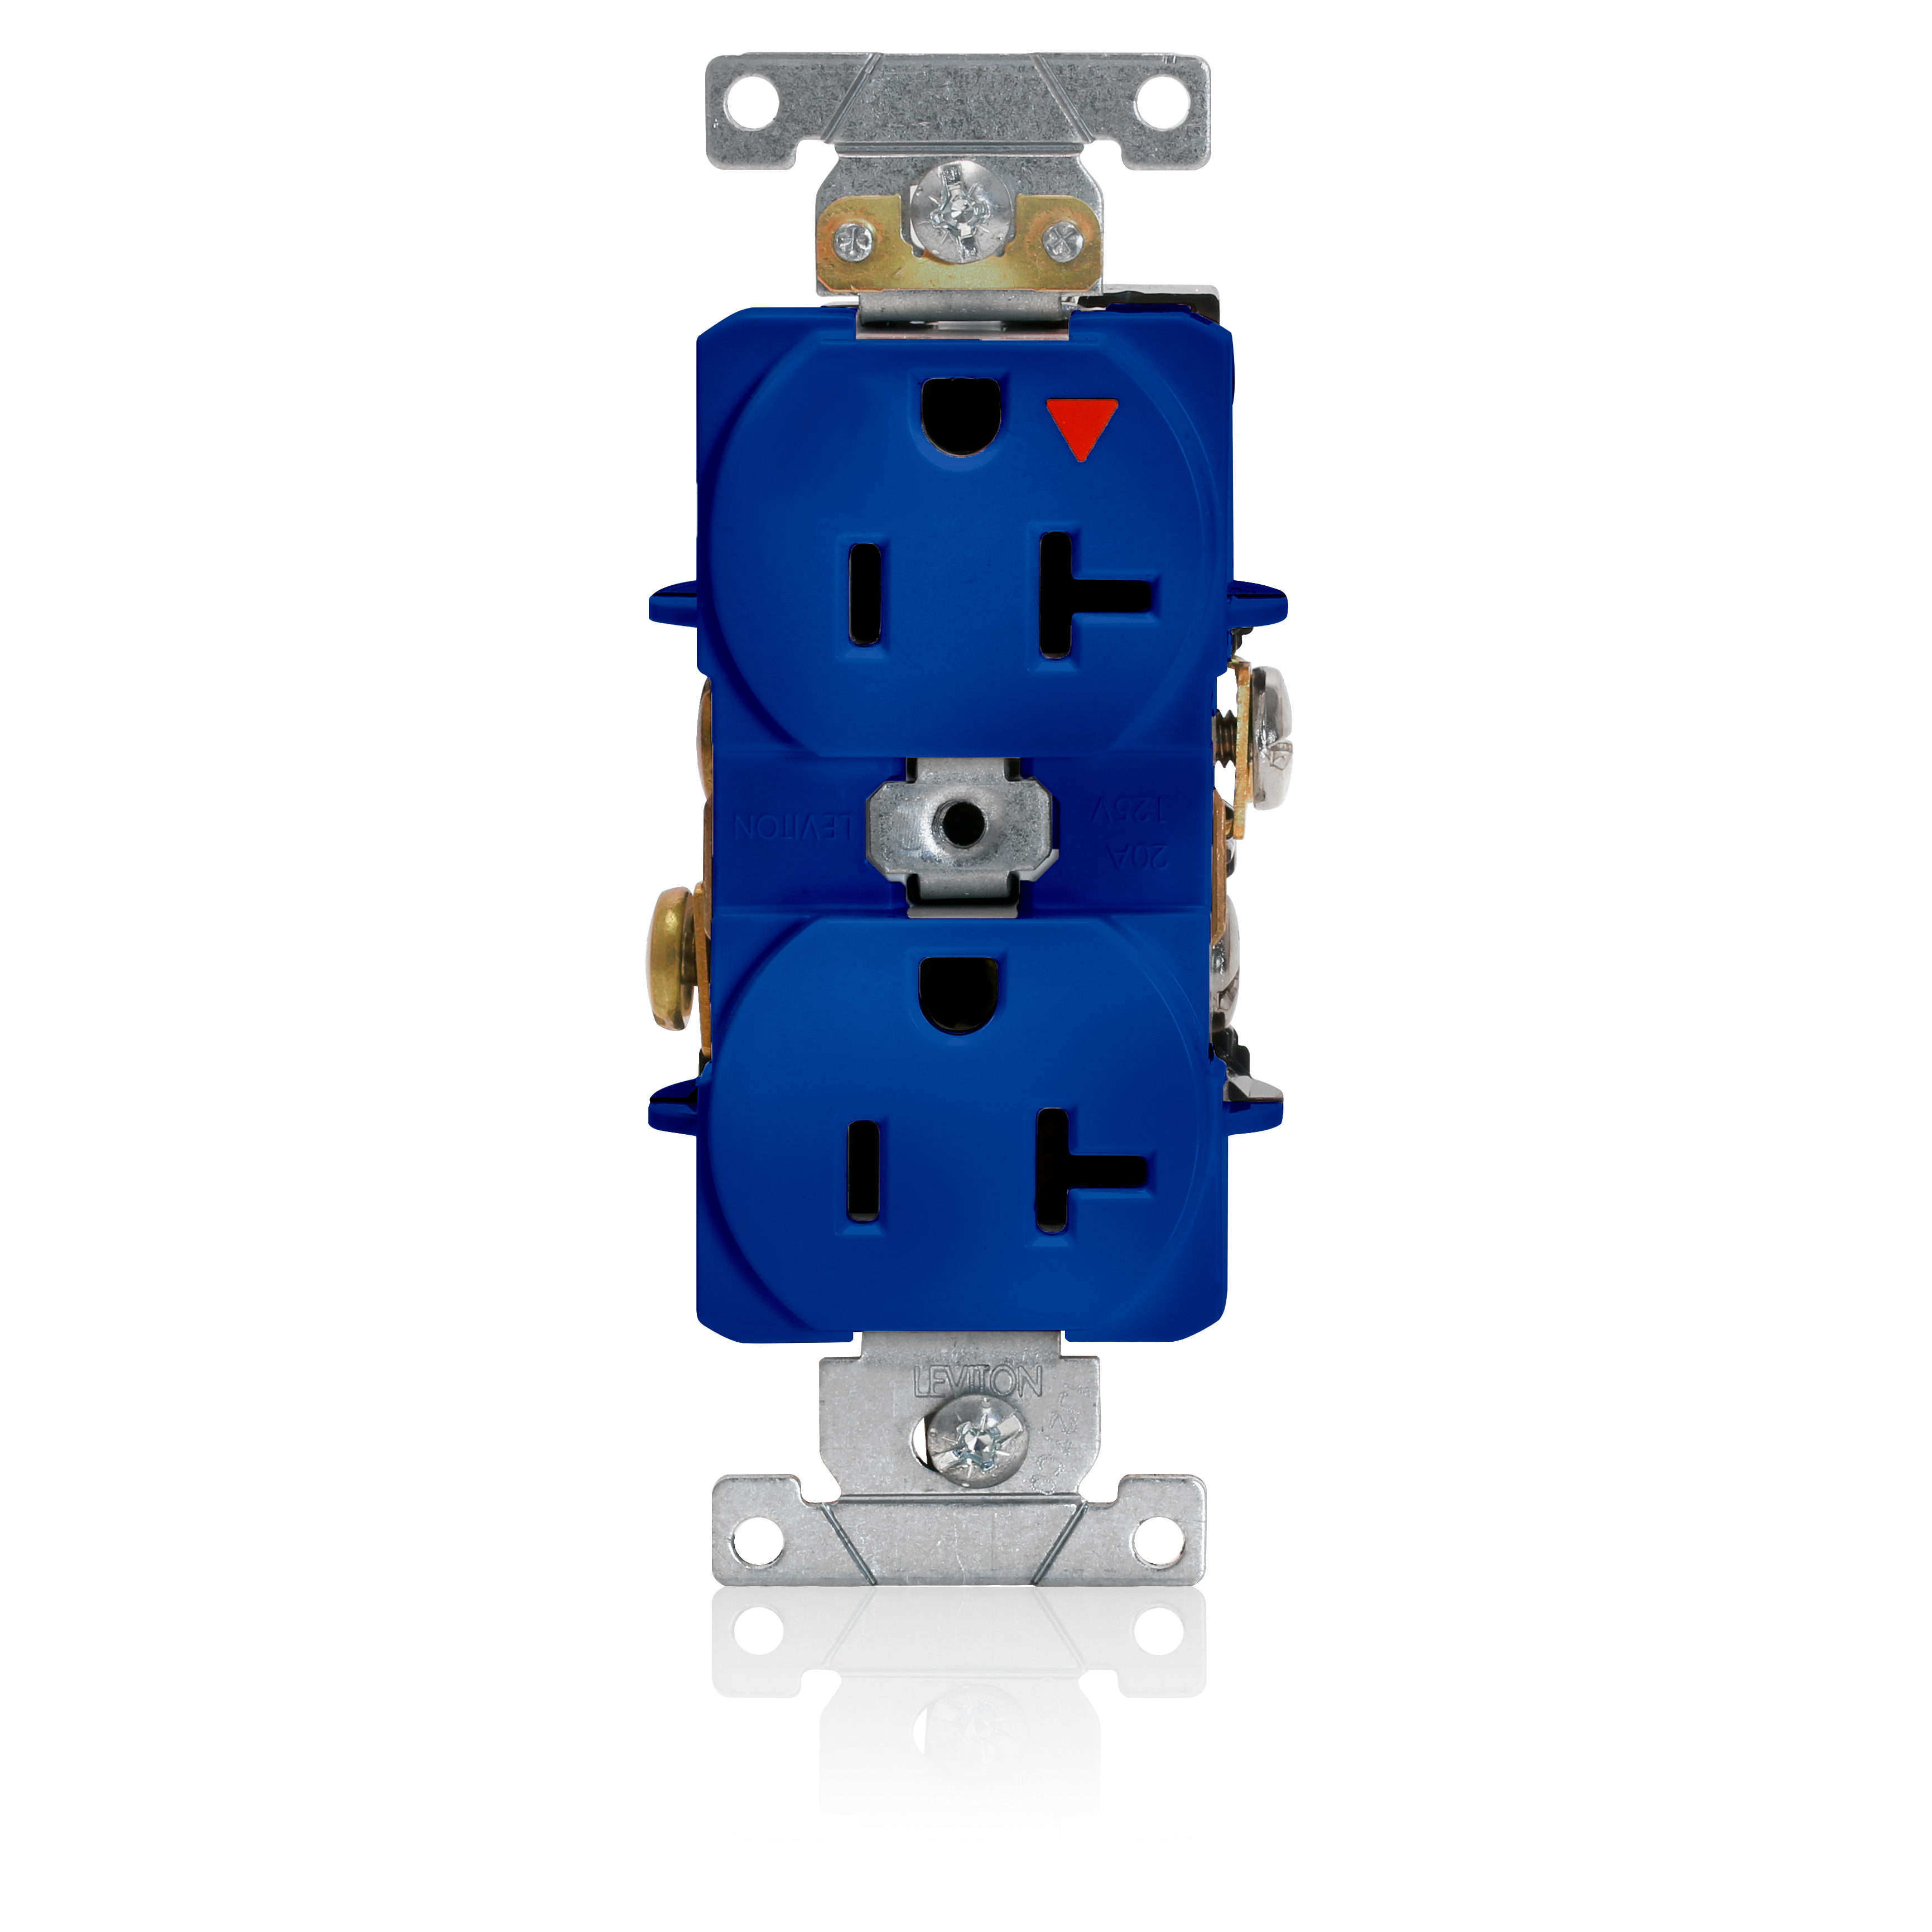 Product image for 20 Amp Isolated Ground Receptacle/Outlet, Industrial Grade, Self-Grounding